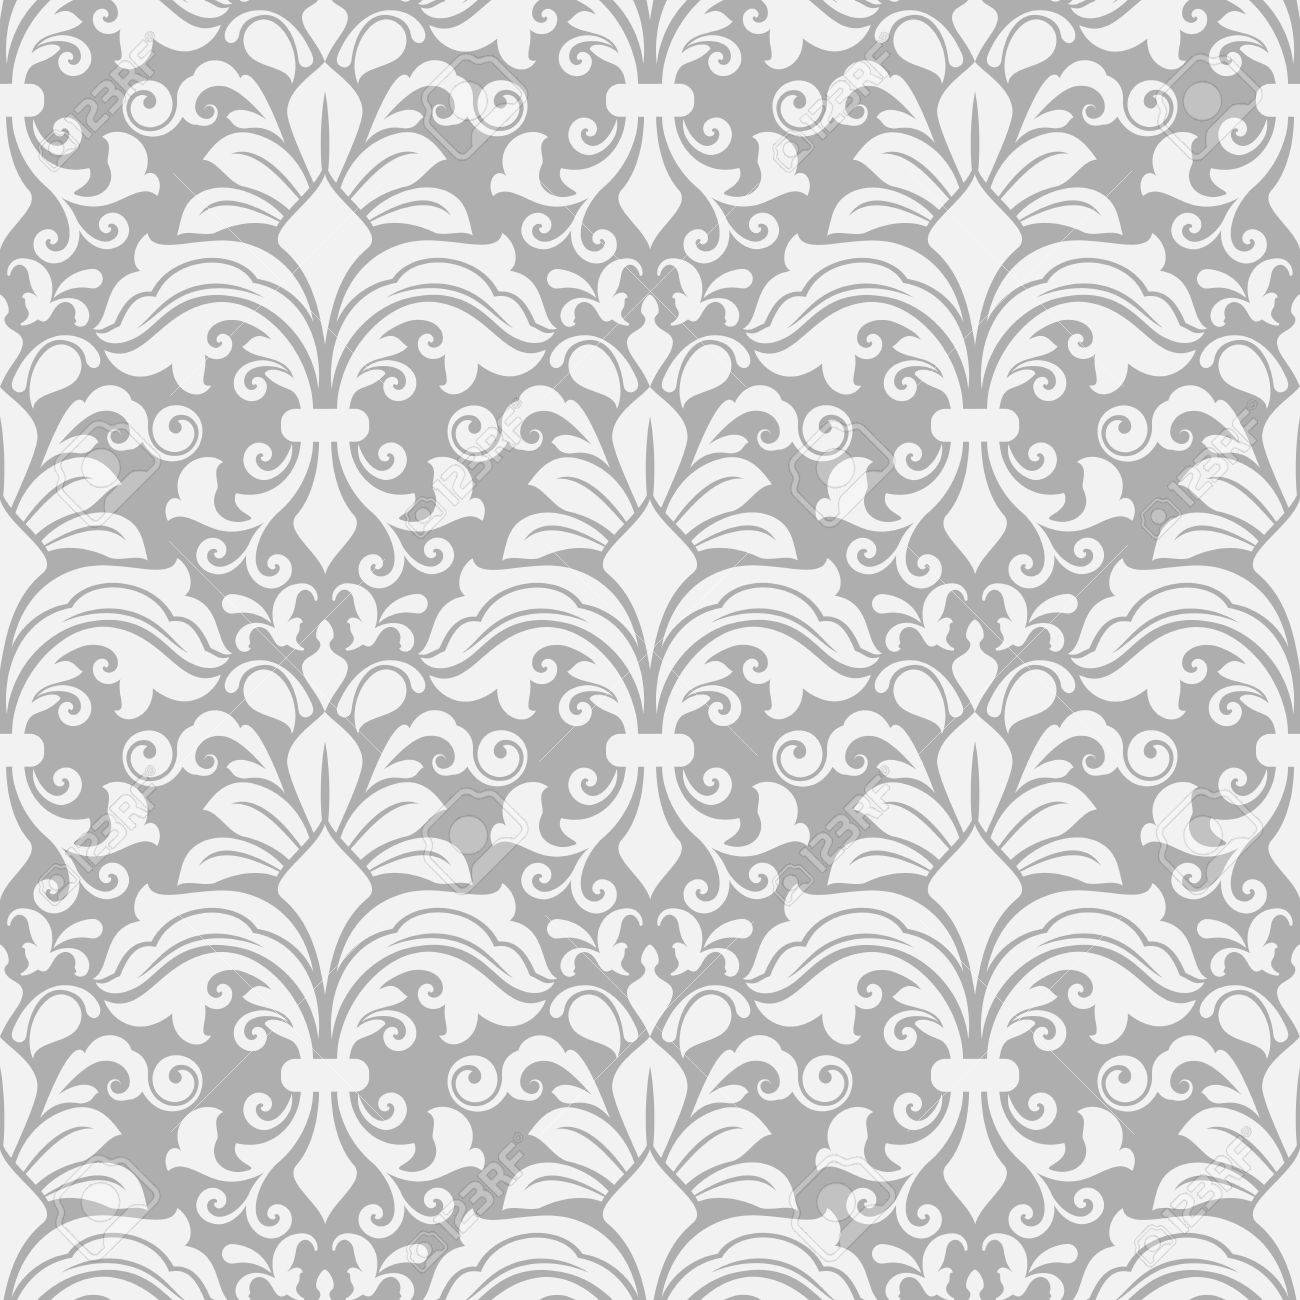 Seamless White And Grey Floral Vector Background Repeating